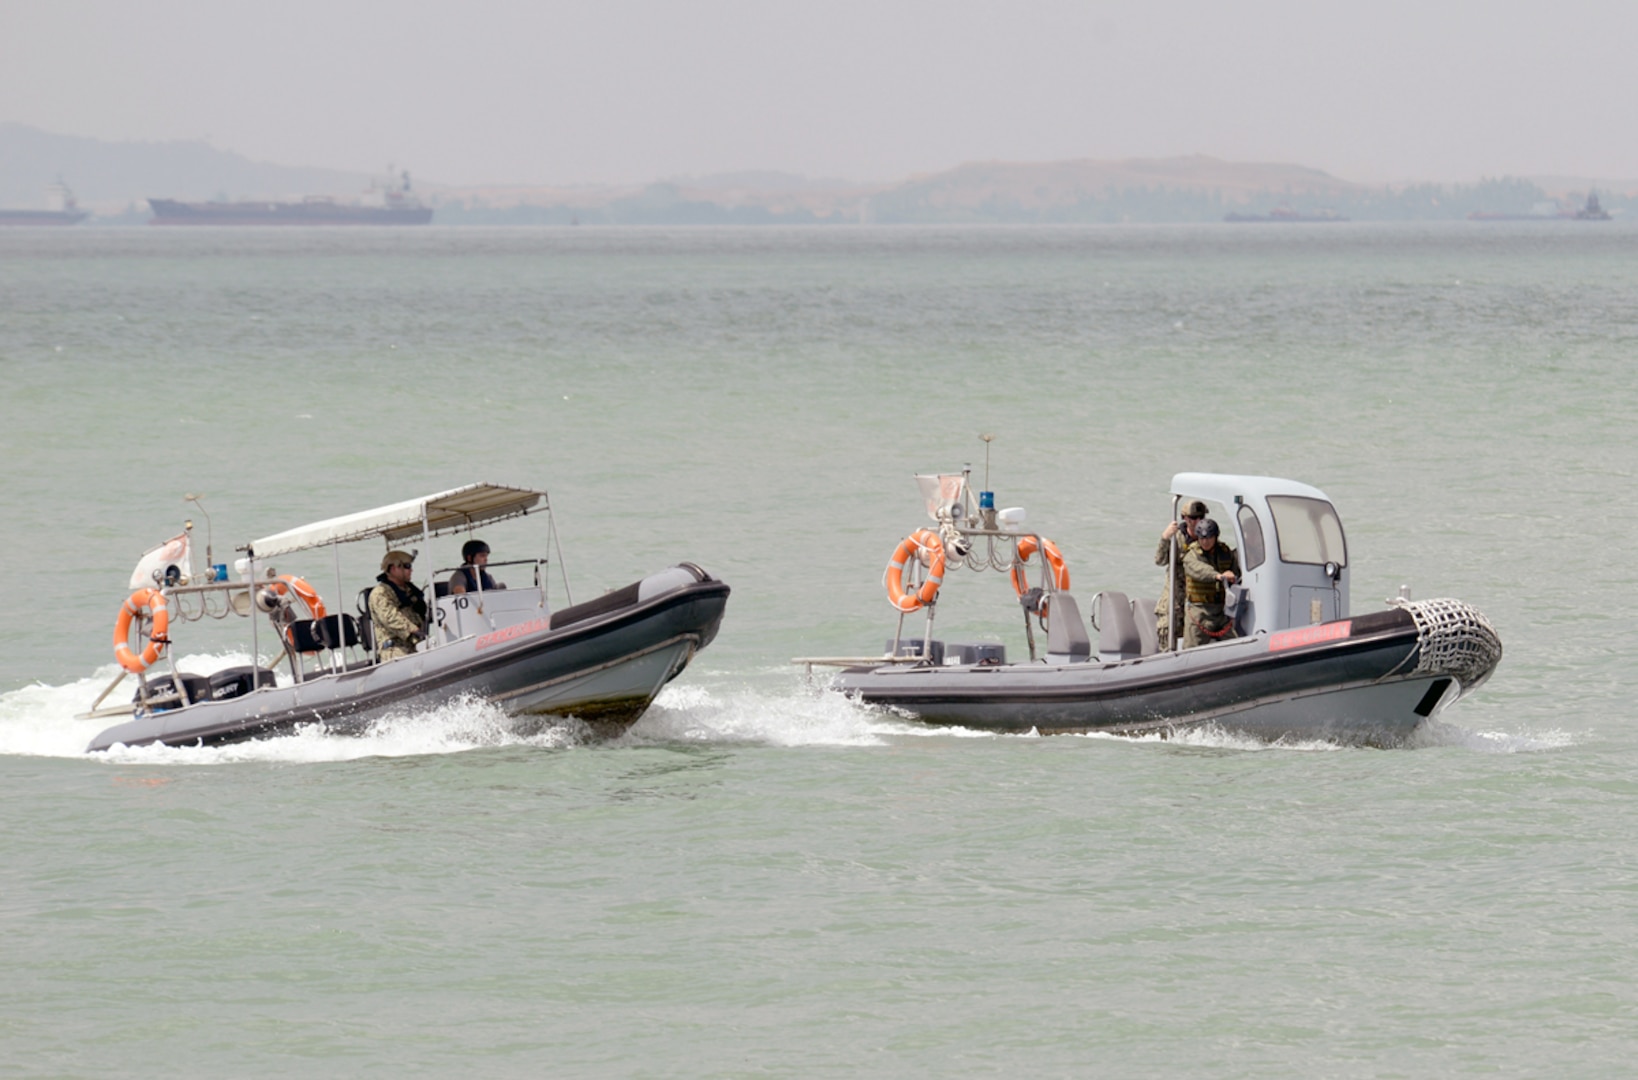 SINGAPORE (Jul. 15, 2015) - Sailors assigned to Coastal Riverine Squadron 3 and members of the Republic of Singapore Navy exchange visit, board, search and seizure (VBSS) techniques during Cooperation Afloat Readiness and Training (CARAT) Singapore 2015. In its 21st year, CARAT is an annual, bilateral exercise series with the U.S. Navy, U.S. Marine Corps and the armed forces of nine partner nations including, Bangladesh, Brunei, Cambodia, Indonesia, Malaysia, the Philippines, Singapore, Thailand and Timor-Leste. 